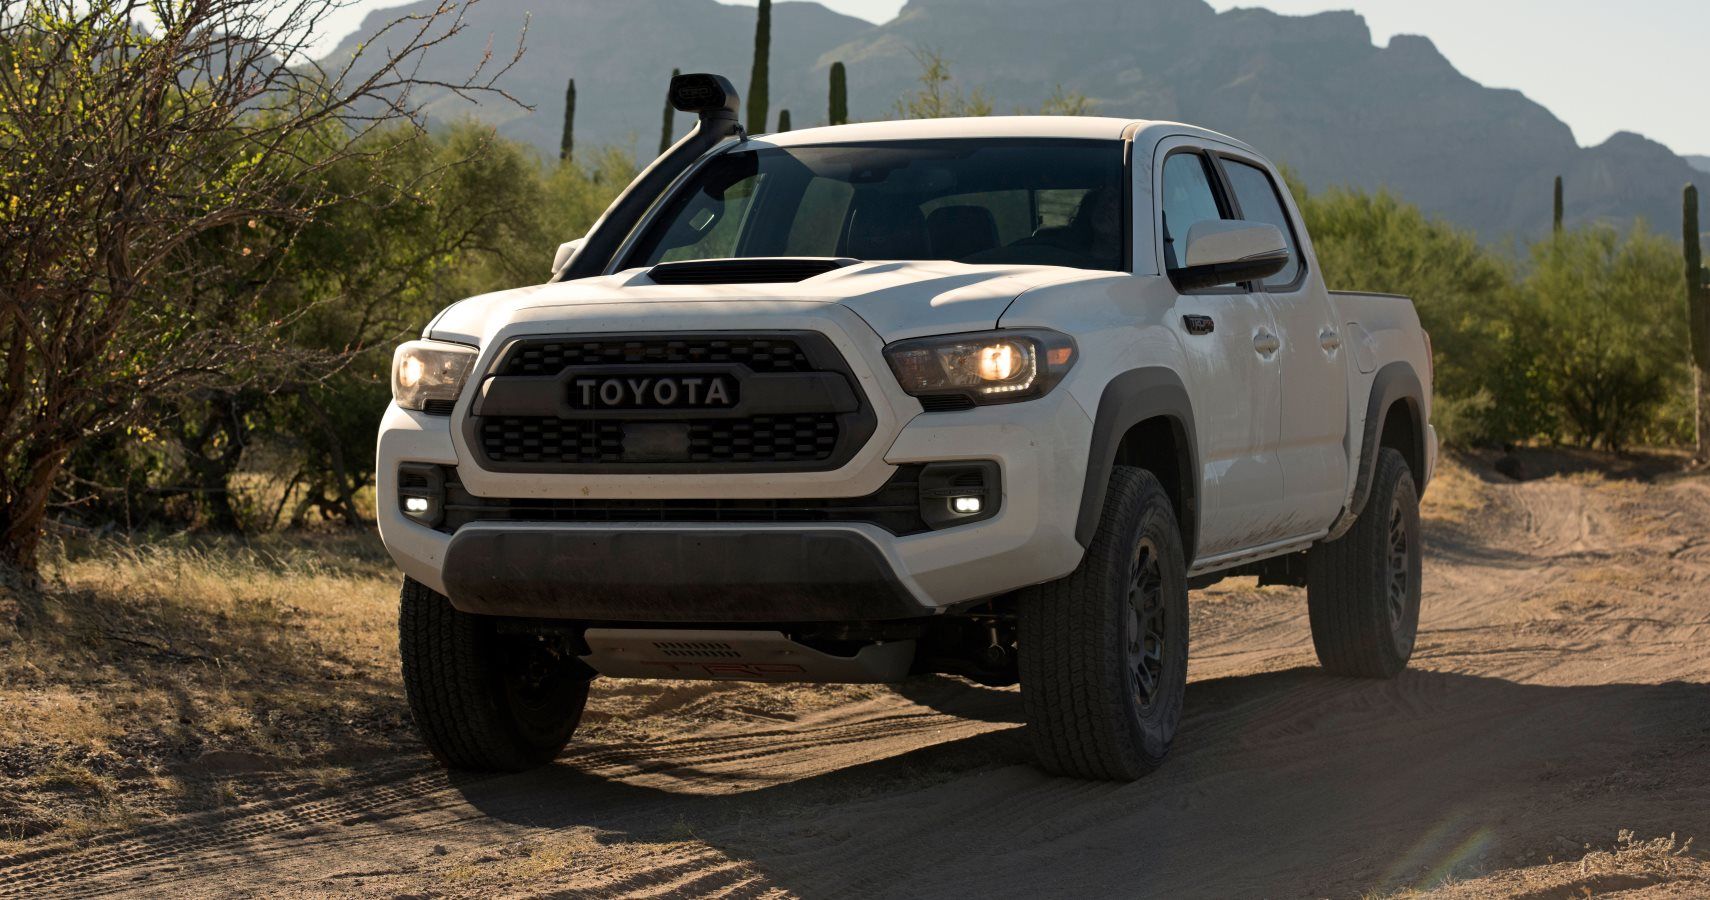 Review: 2019 Toyota Tacoma TRD Pro - Toyota Reliability Meets Off-Road Ruggedness